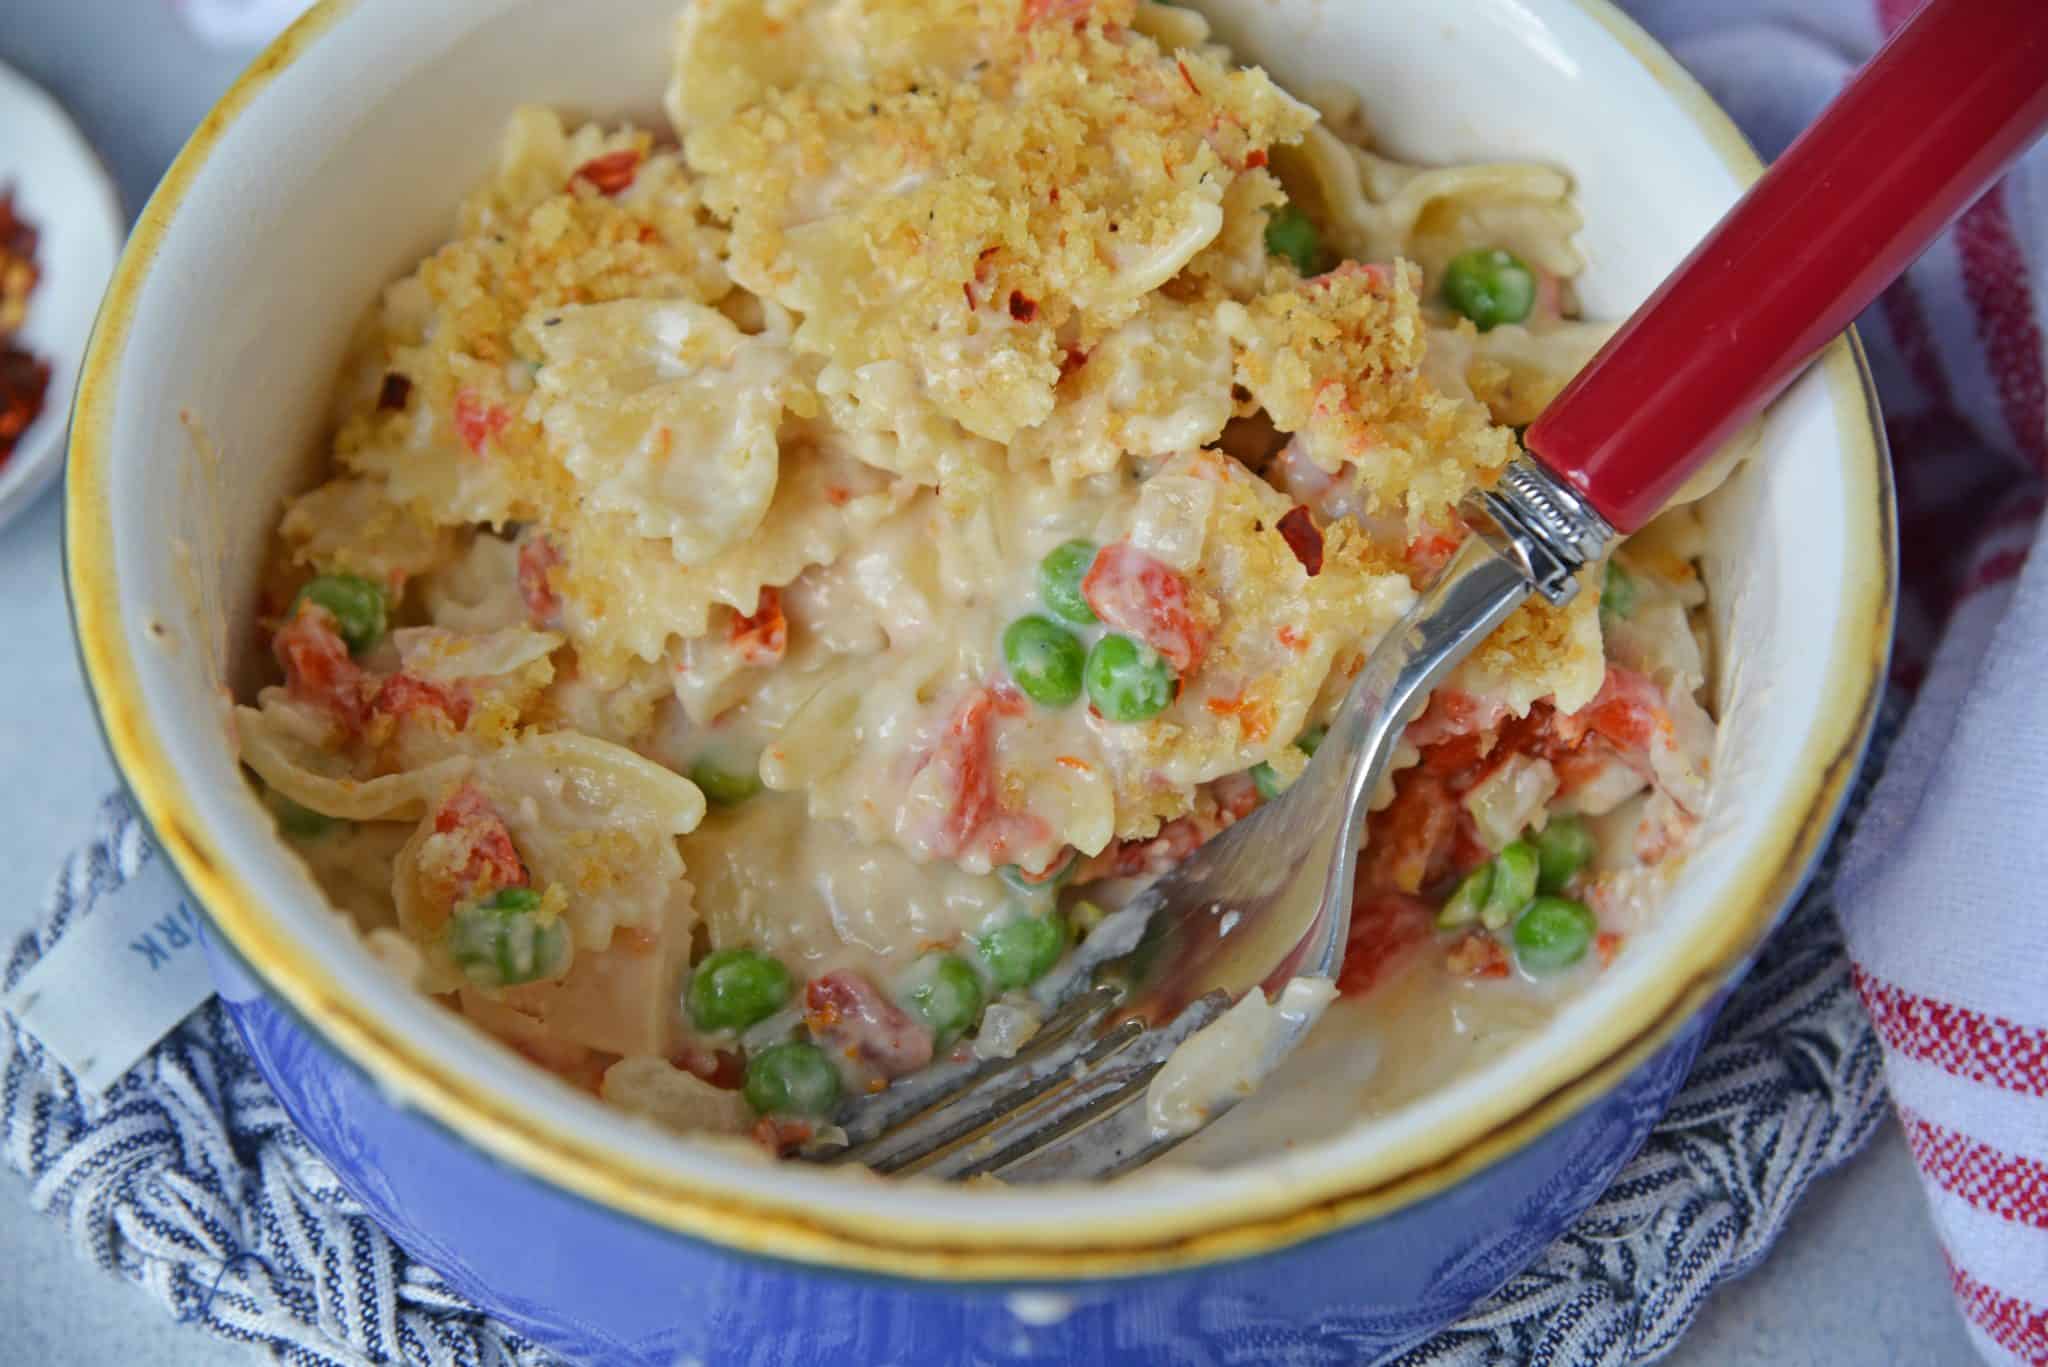 Fancy Tuna Noodle Casserole comes packed with bow tie pasta, seasoned panko, fresh vegetables and sun dried tomatoes! #tunanoodlecasserolerecipe #easytunanoodlecasserole www.savoryexperiments.com